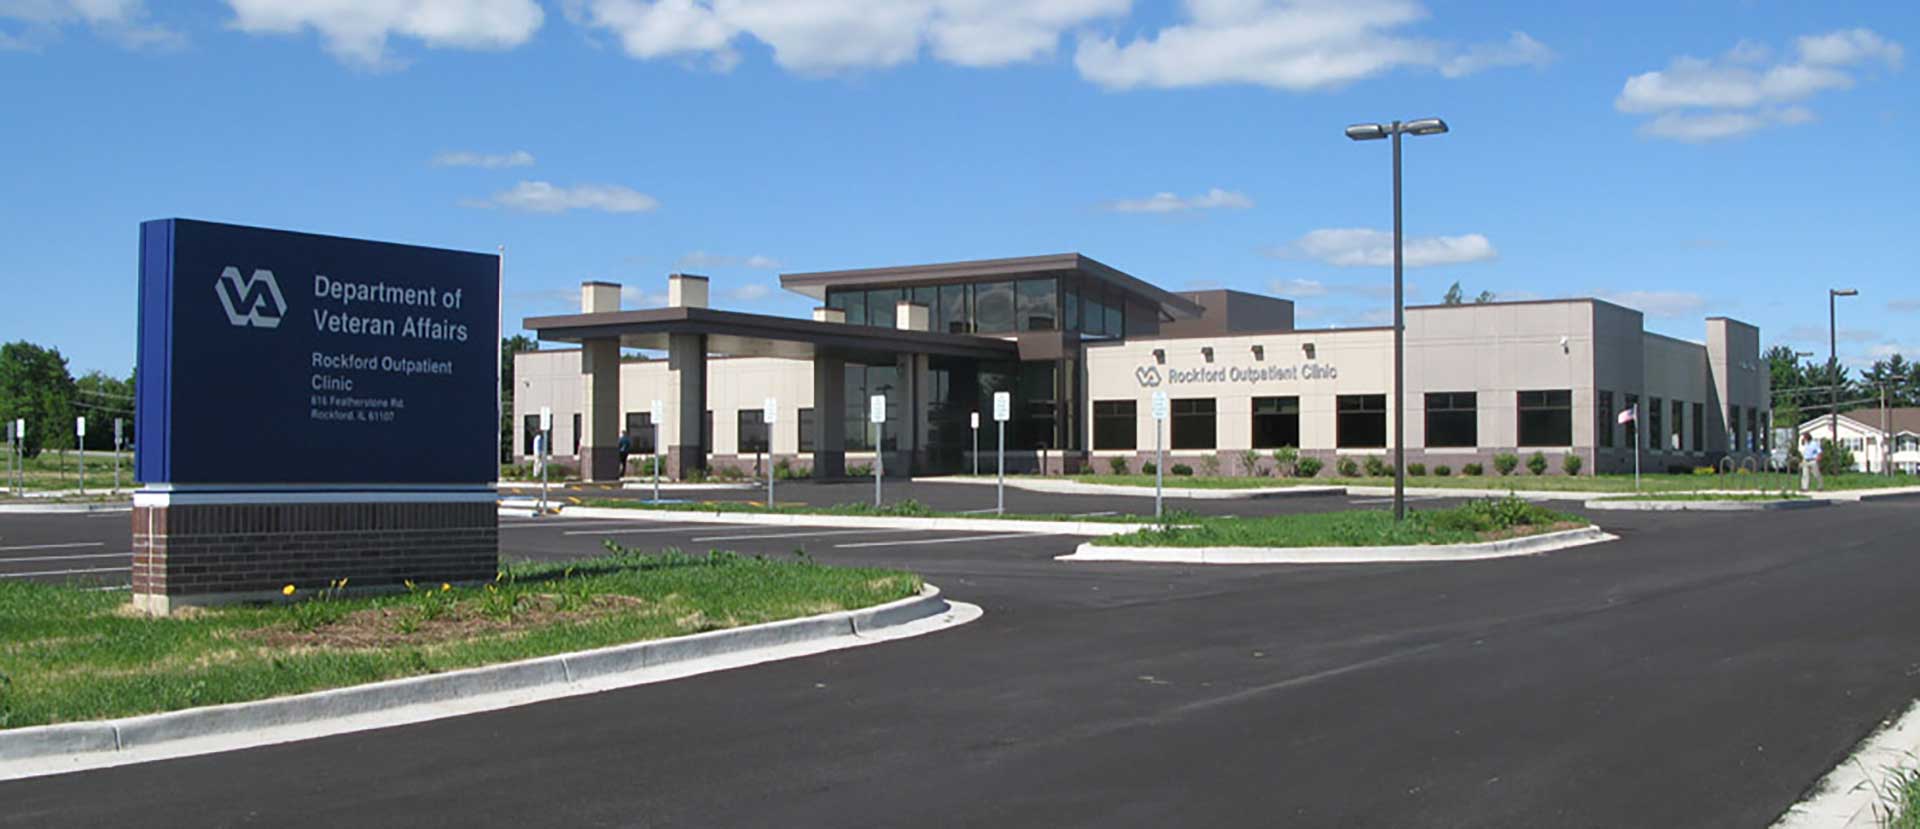 Exterior of the Rockford VA Outpatient Clinic